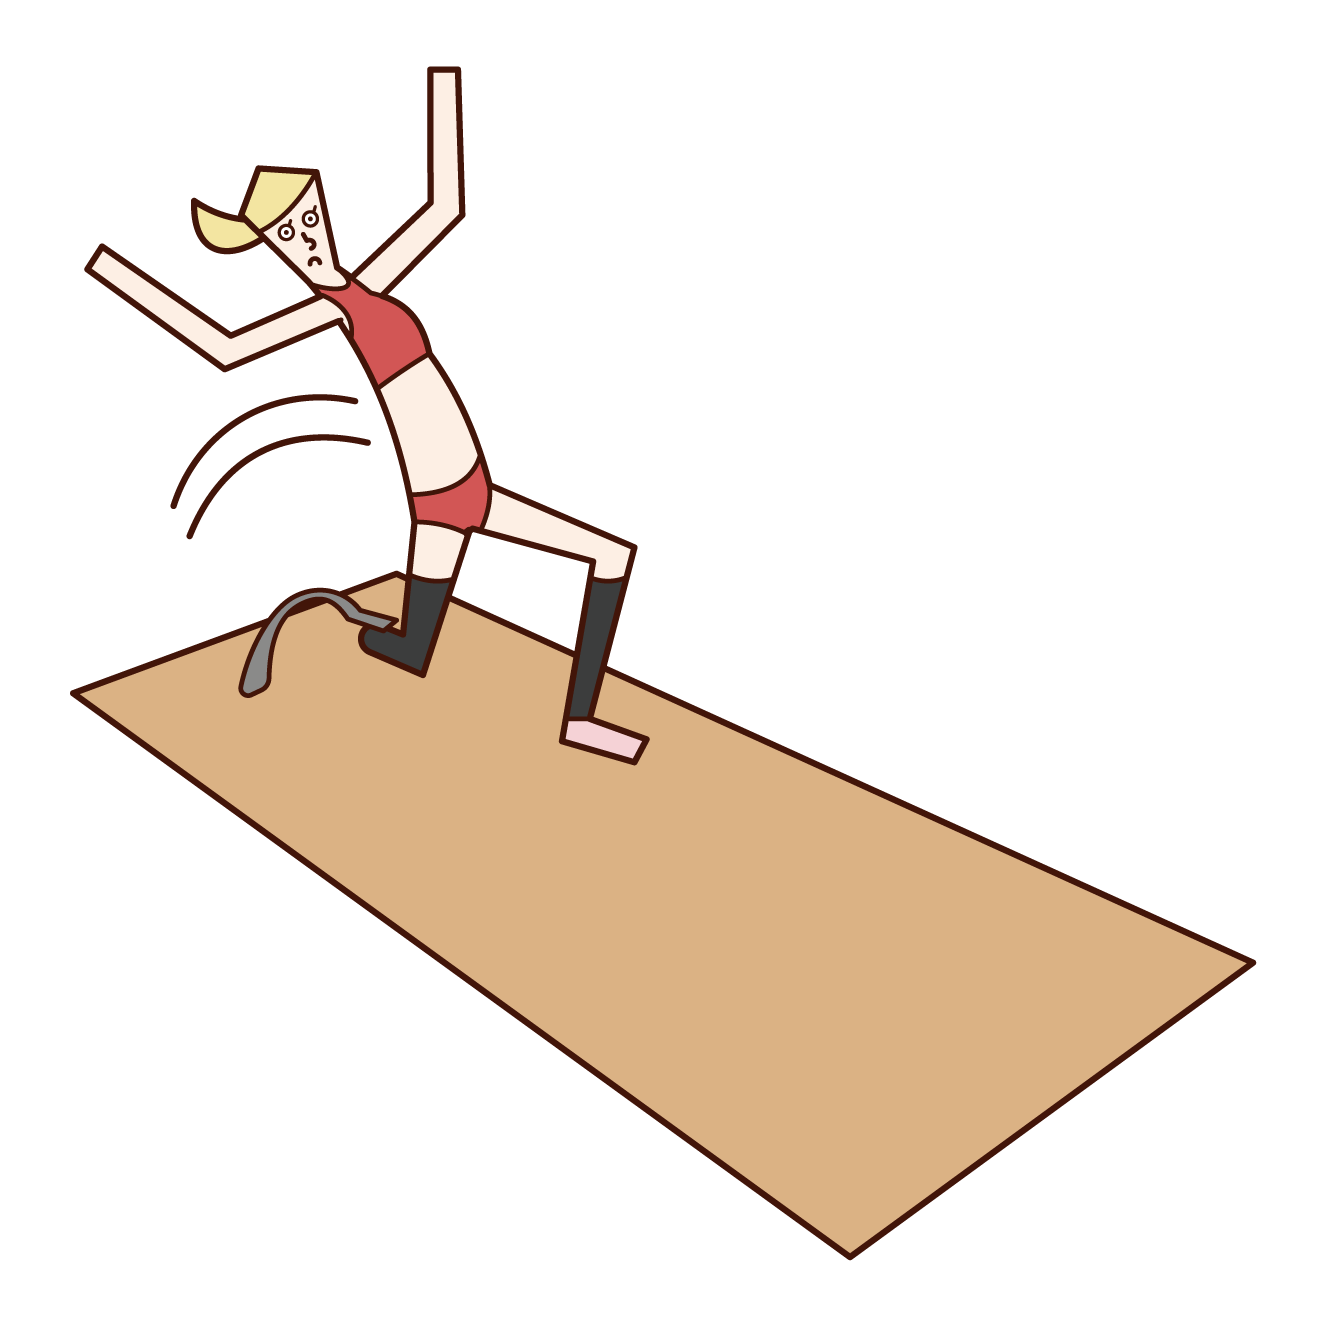 Illustration of a long jump player (woman) with a prosthetic leg